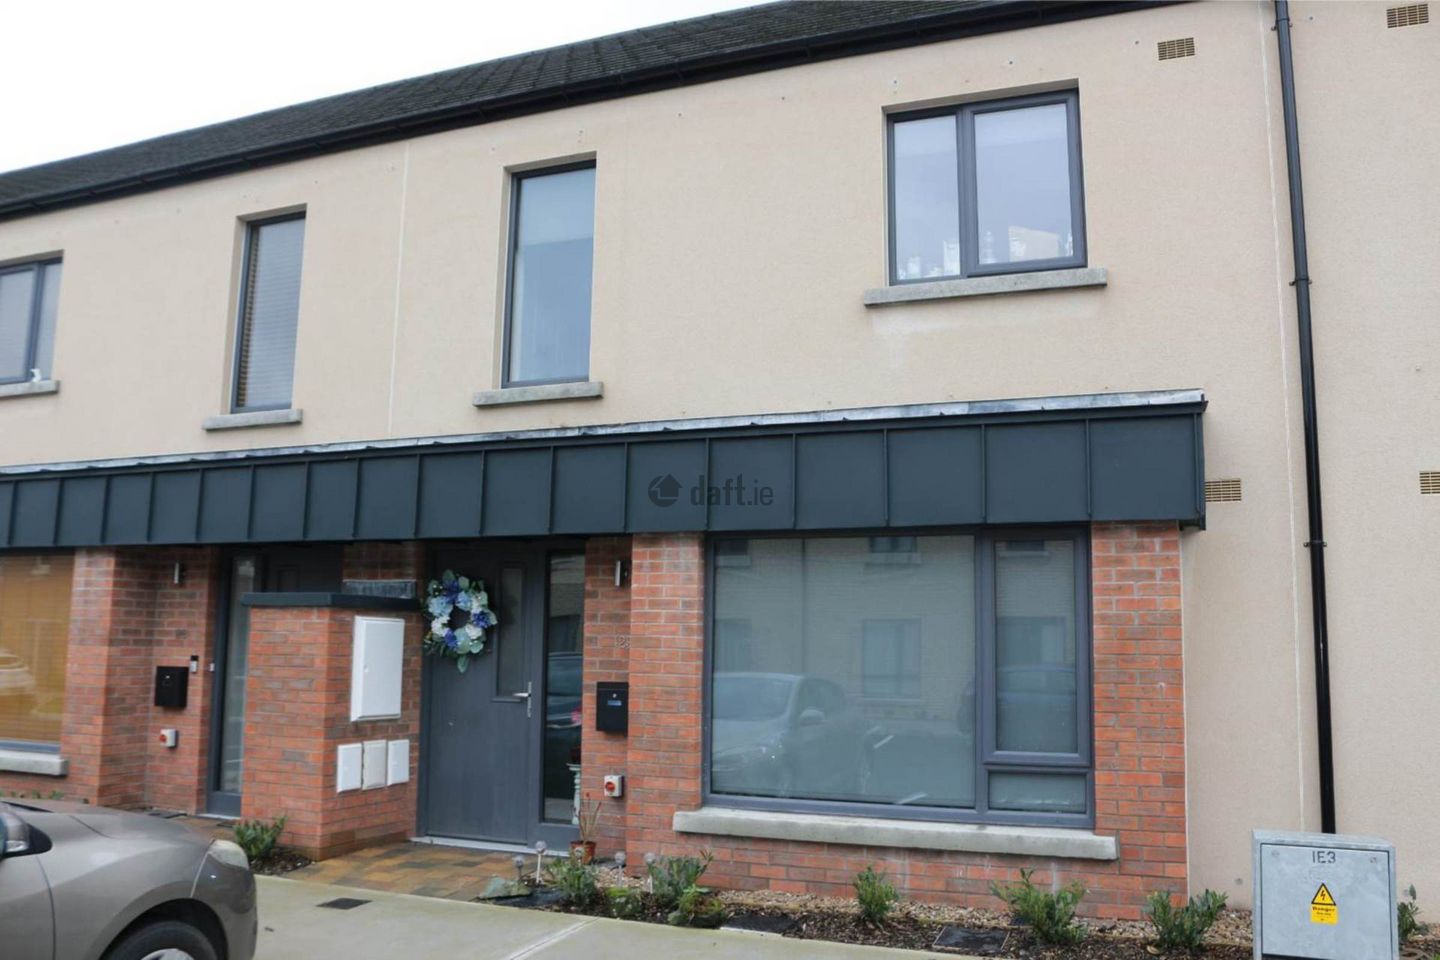 129 Newtown Woods, Termonfeckin Road, Drogheda, Co. Louth